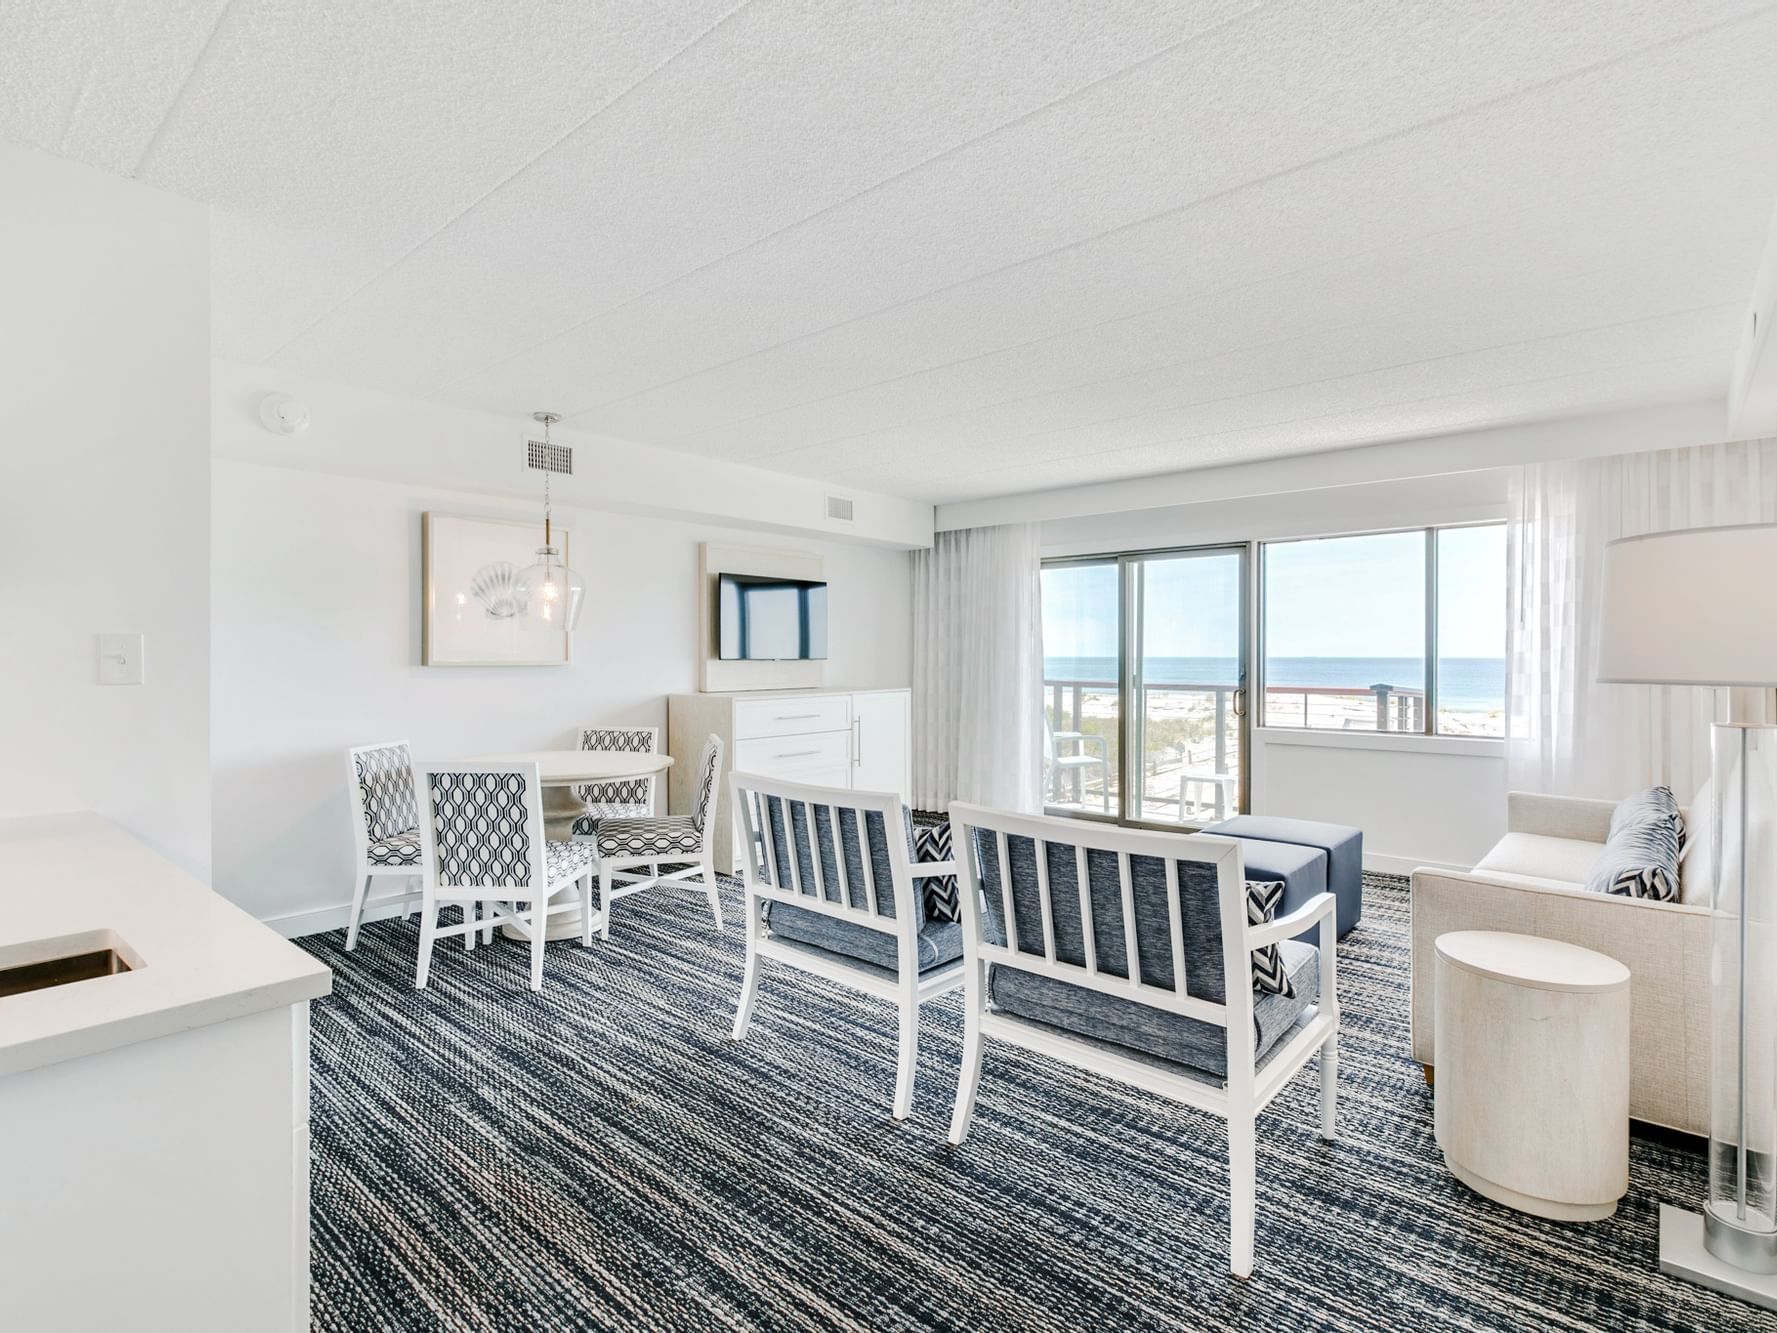 Oceanfront 1 Bedroom Suite at ICONA Windrift Resort with Living area with pull out couch, sitting chairs, and dining table